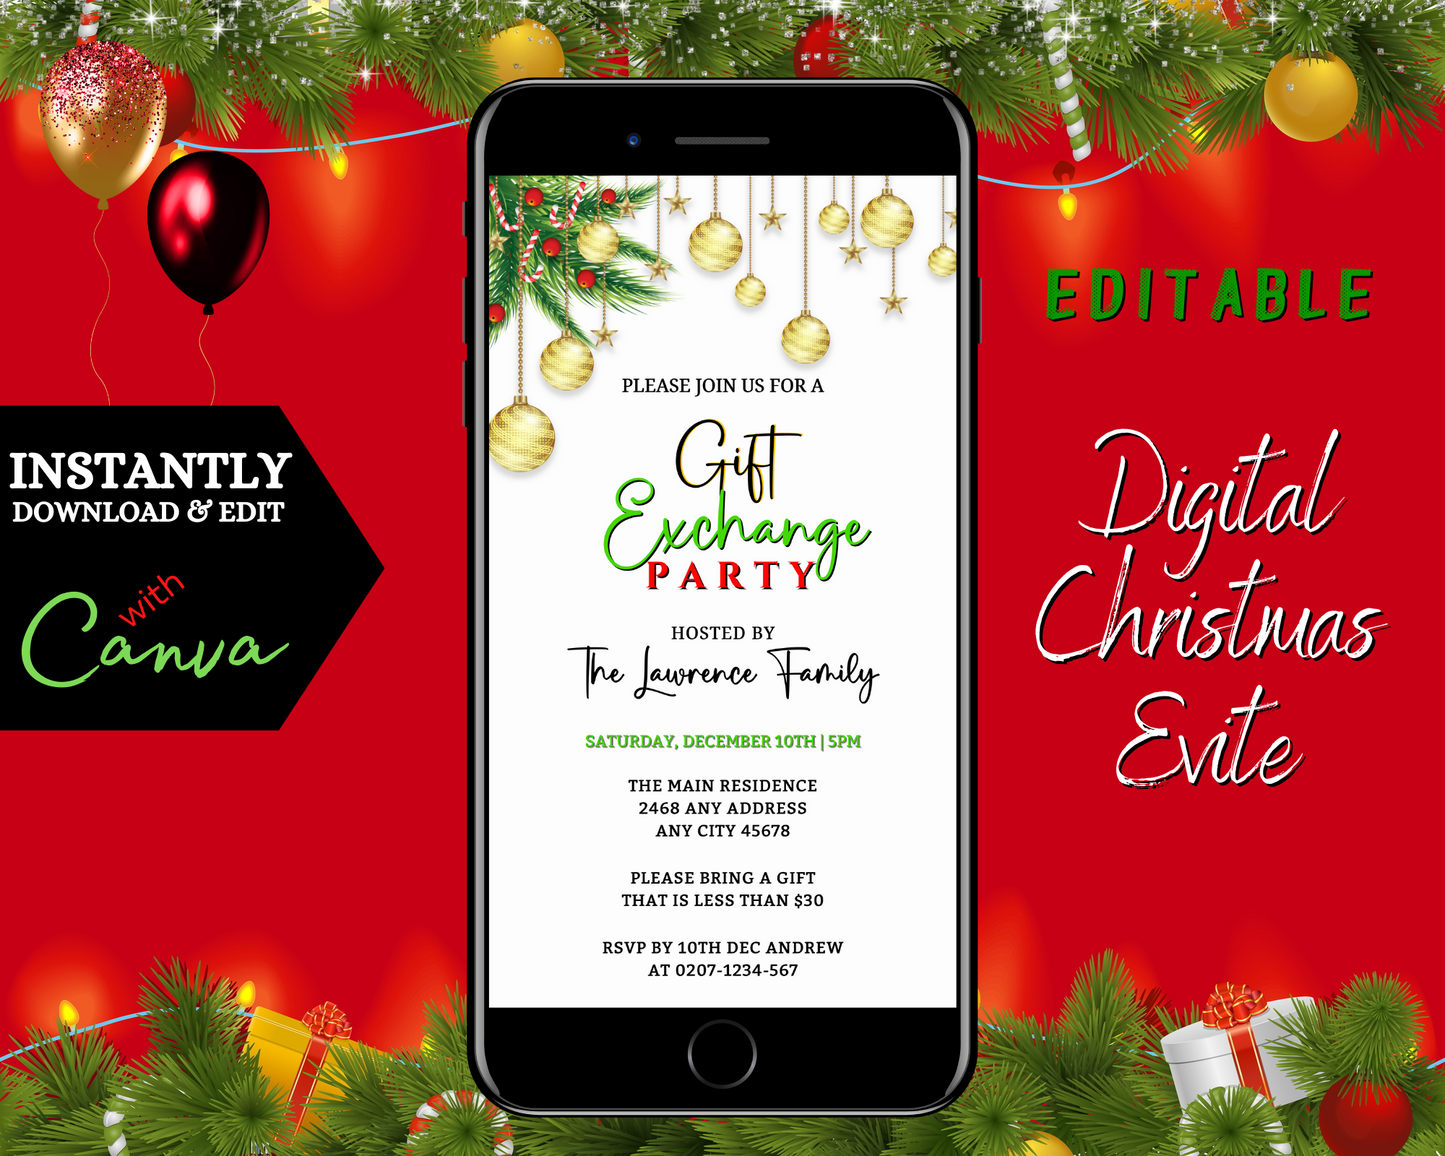 Editable Digital White Gold Red Ornaments | Christmas Party Evite displayed on a smartphone screen with text, showcasing a customizable invitation template for easy personalization and electronic sharing.